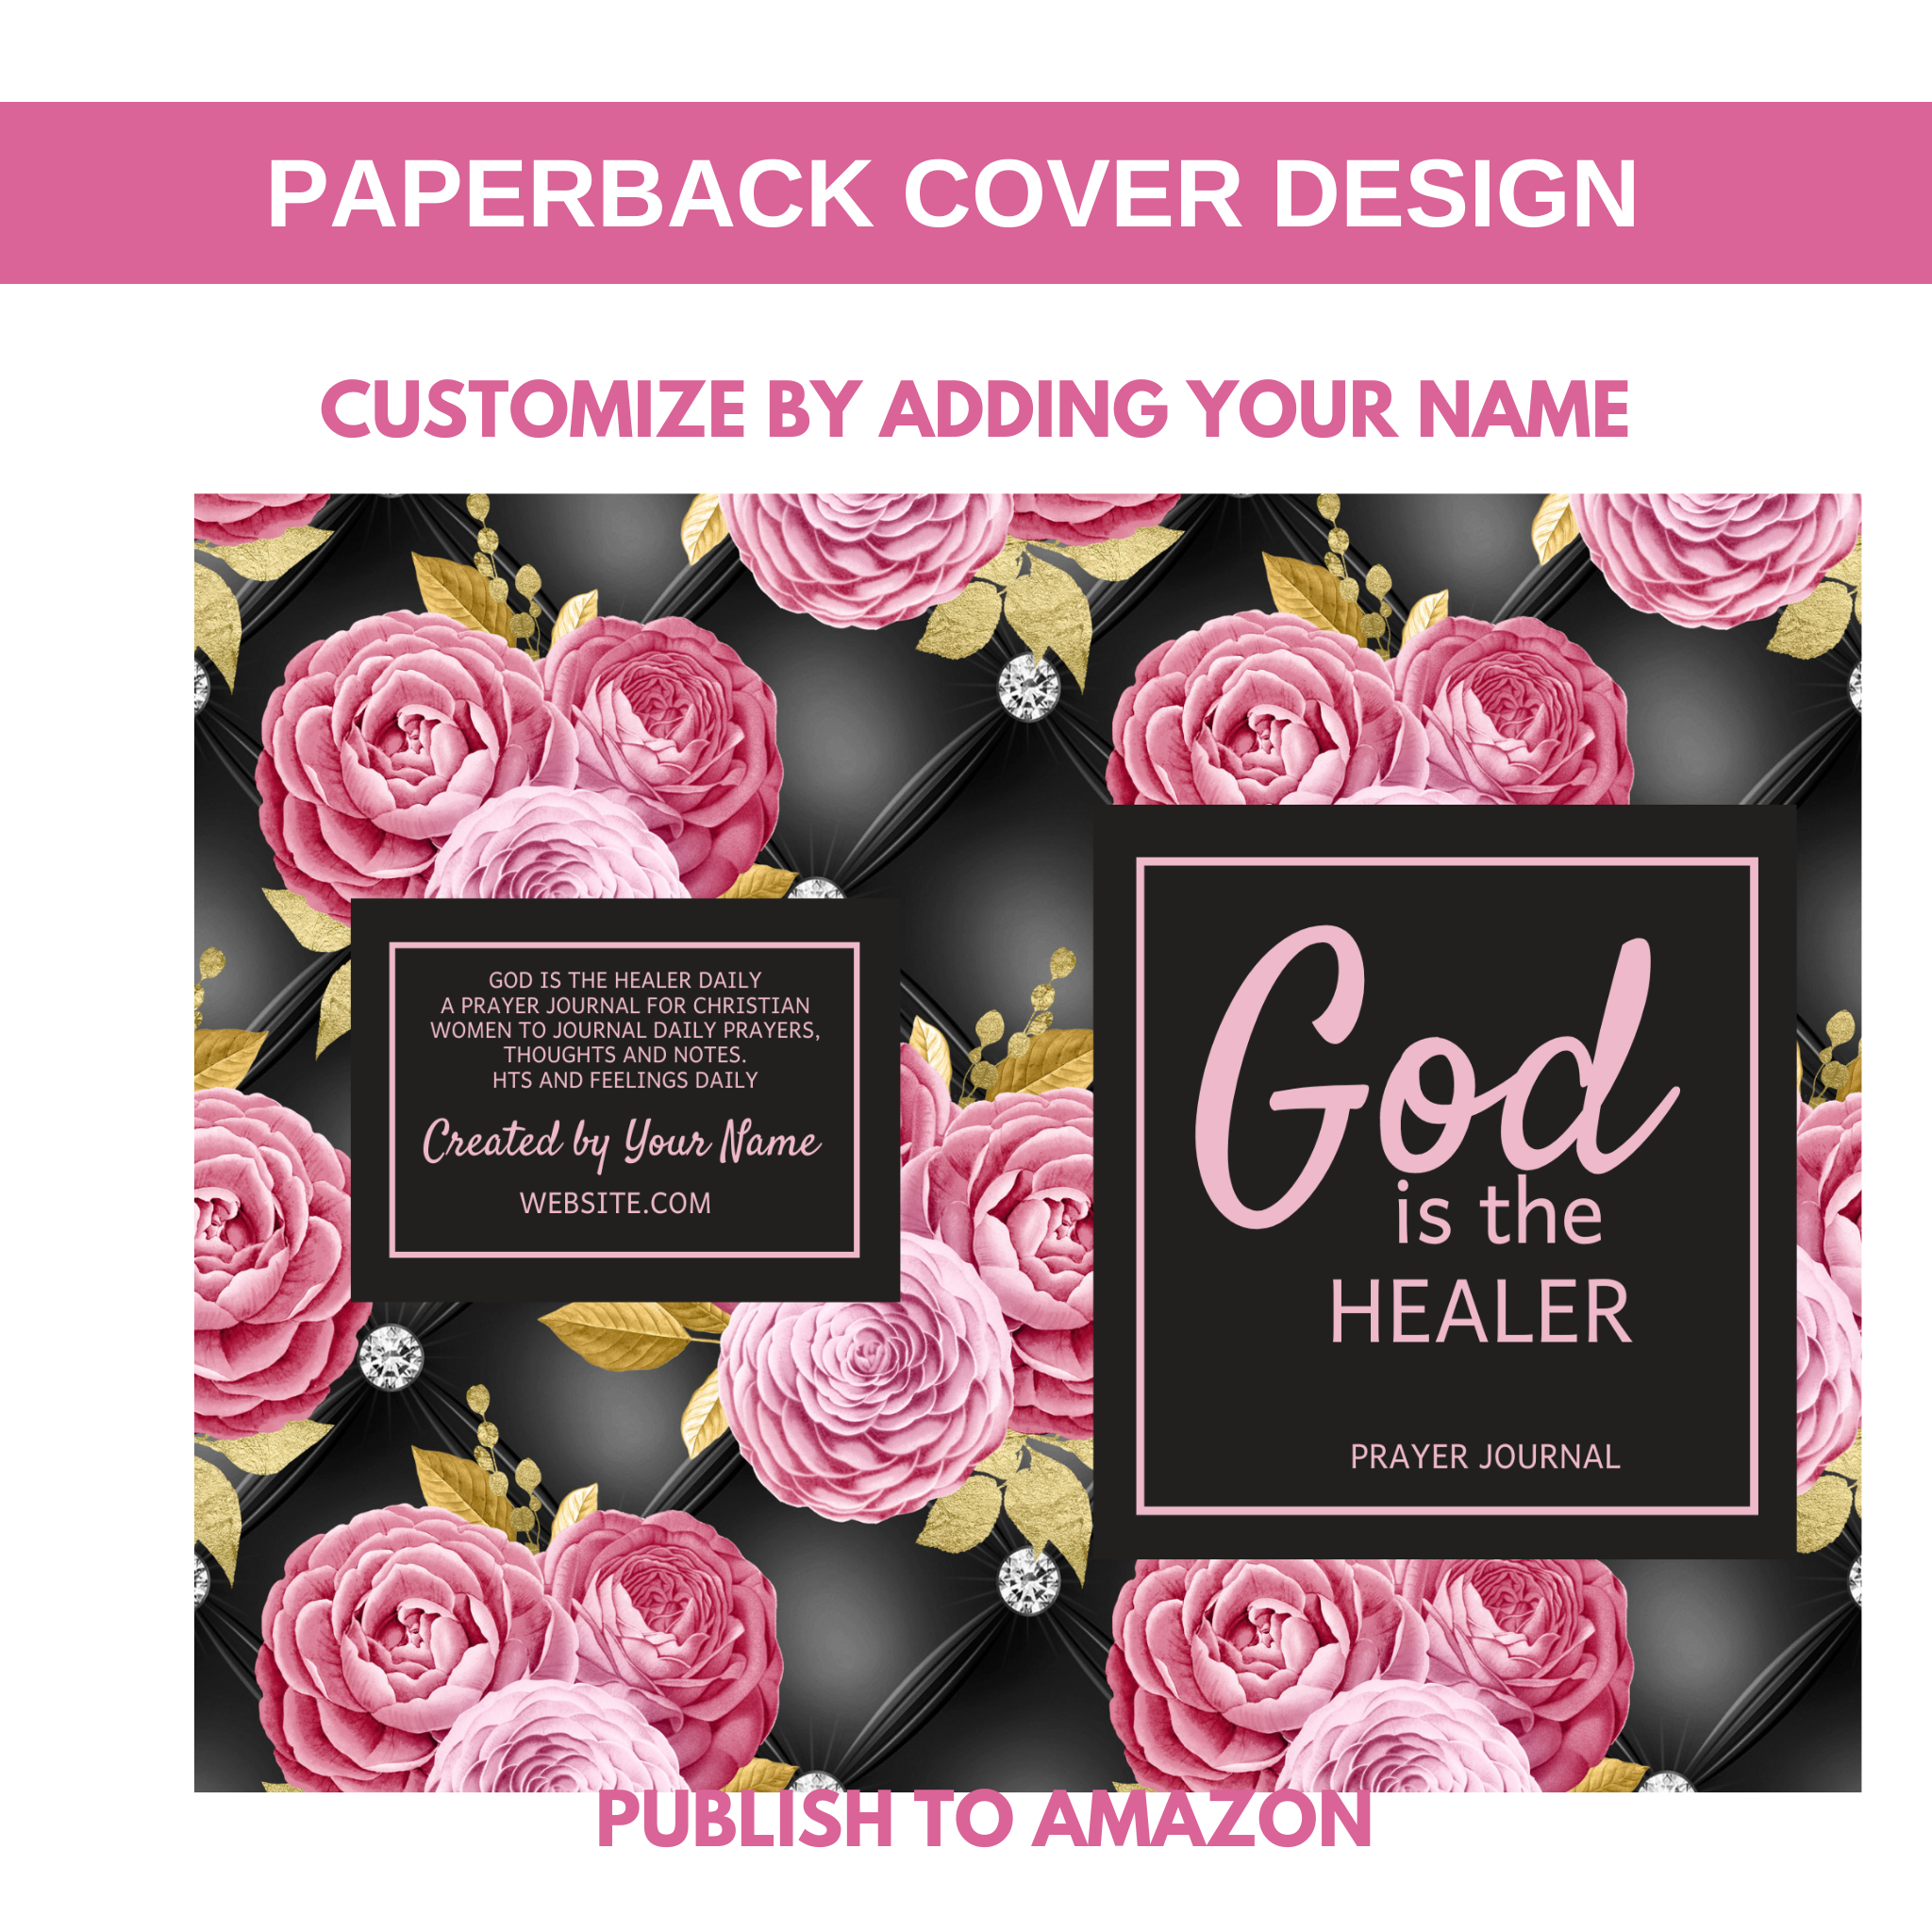 God is the Healer Prayer Journal for Amazon & The Book Patch (spiral)